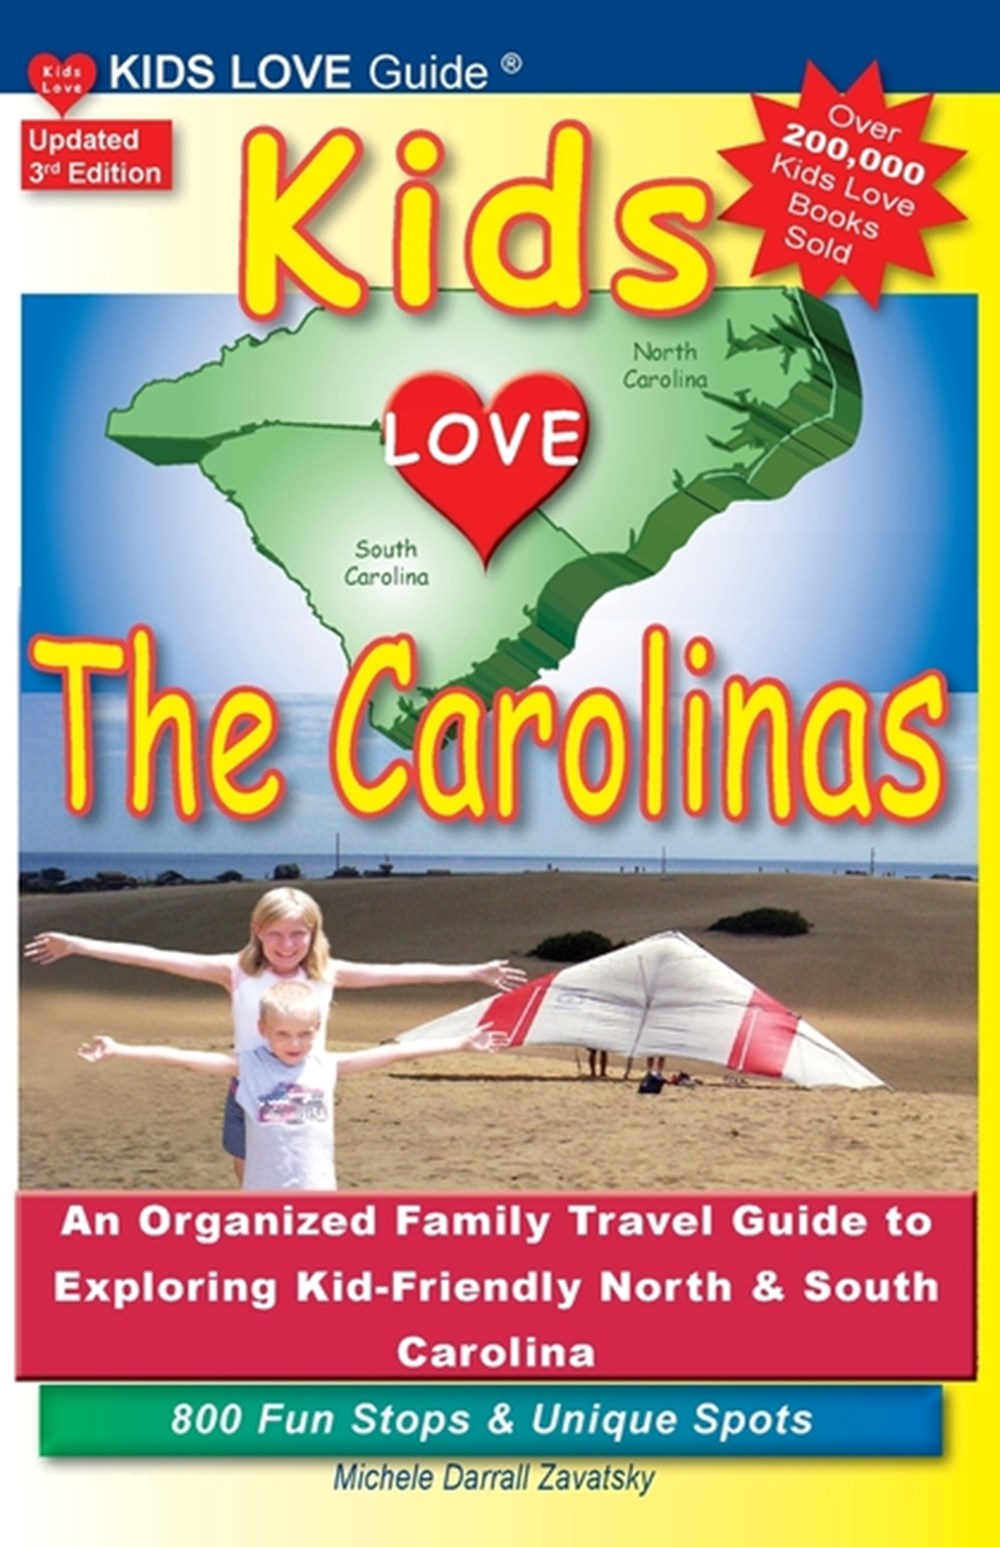 KIDS LOVE THE CAROLINAS, 3rd Edition: An Organized Family Travel Guide to Kid-Friendly North & South